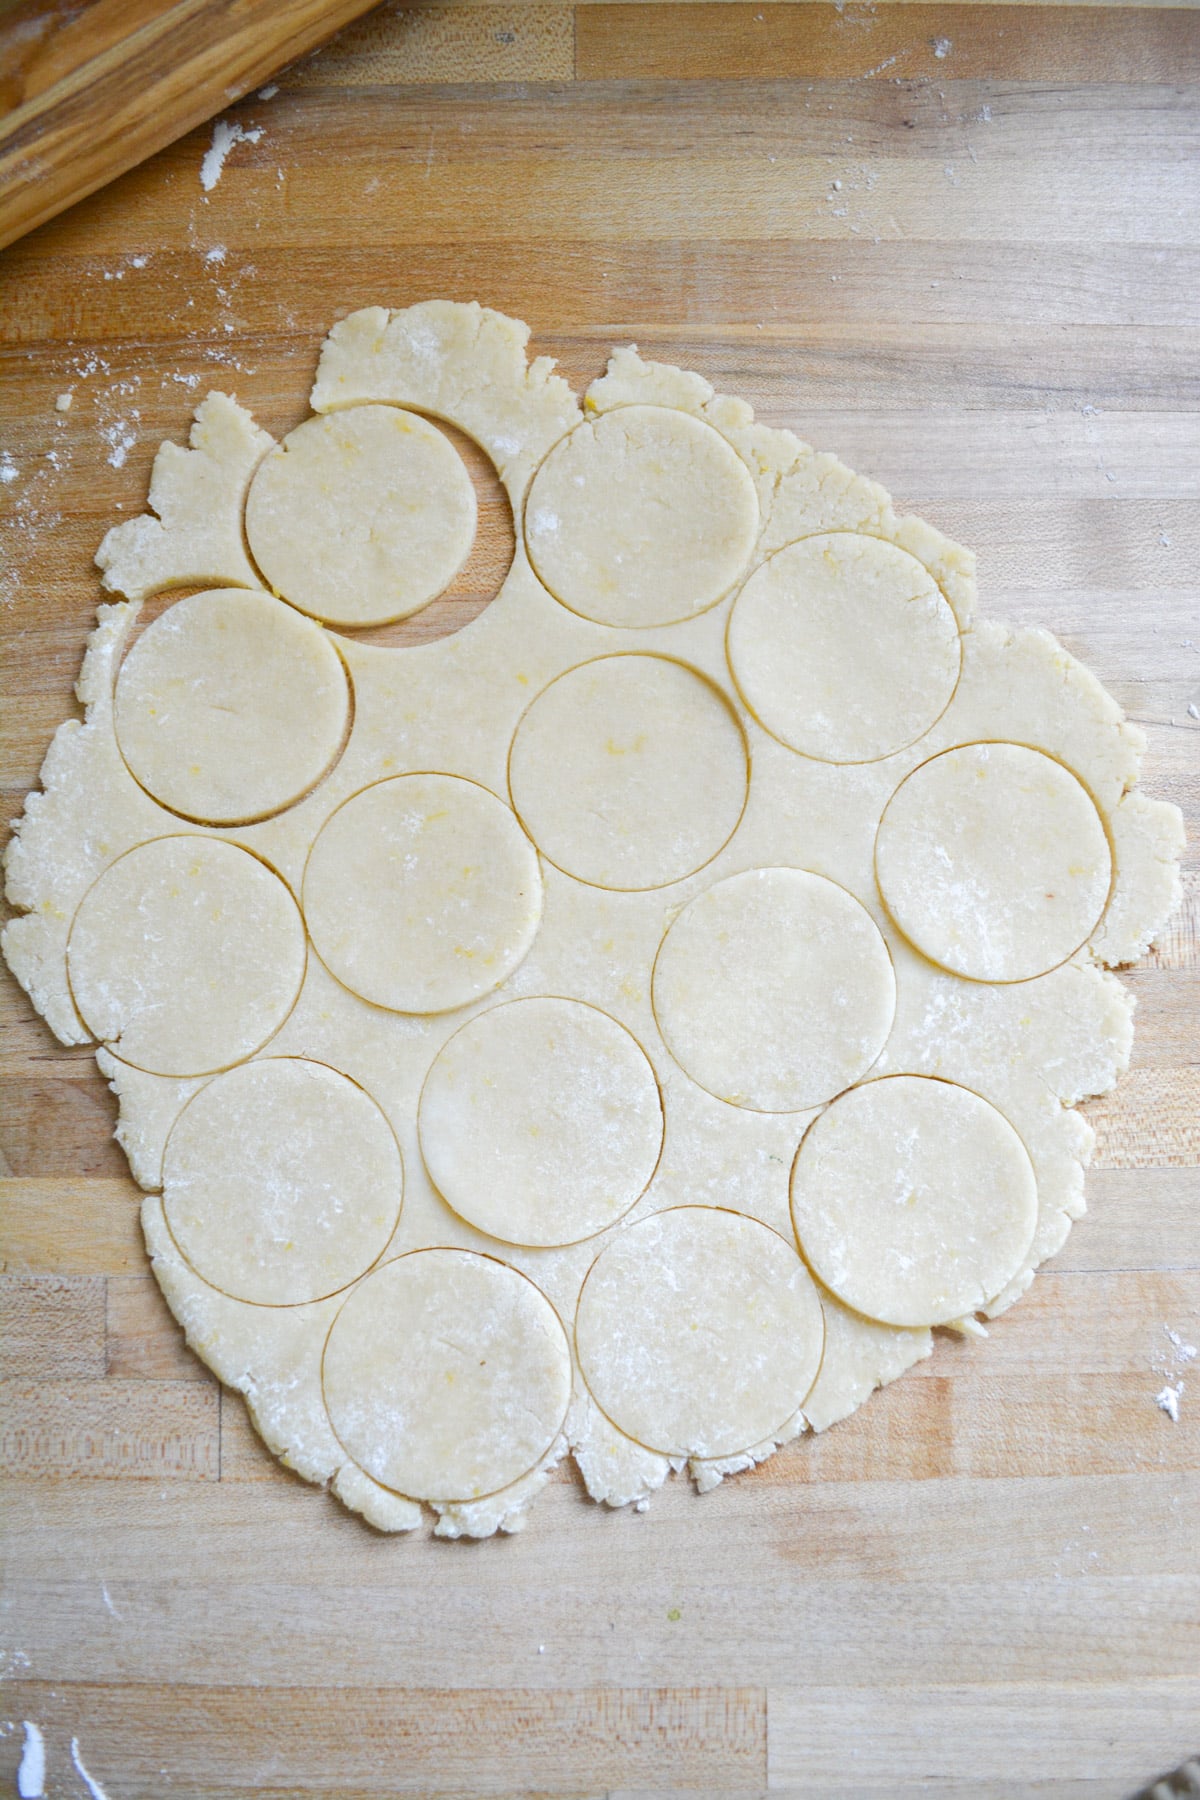 Dough rolled out on a wooden surface with circles cut out of it.